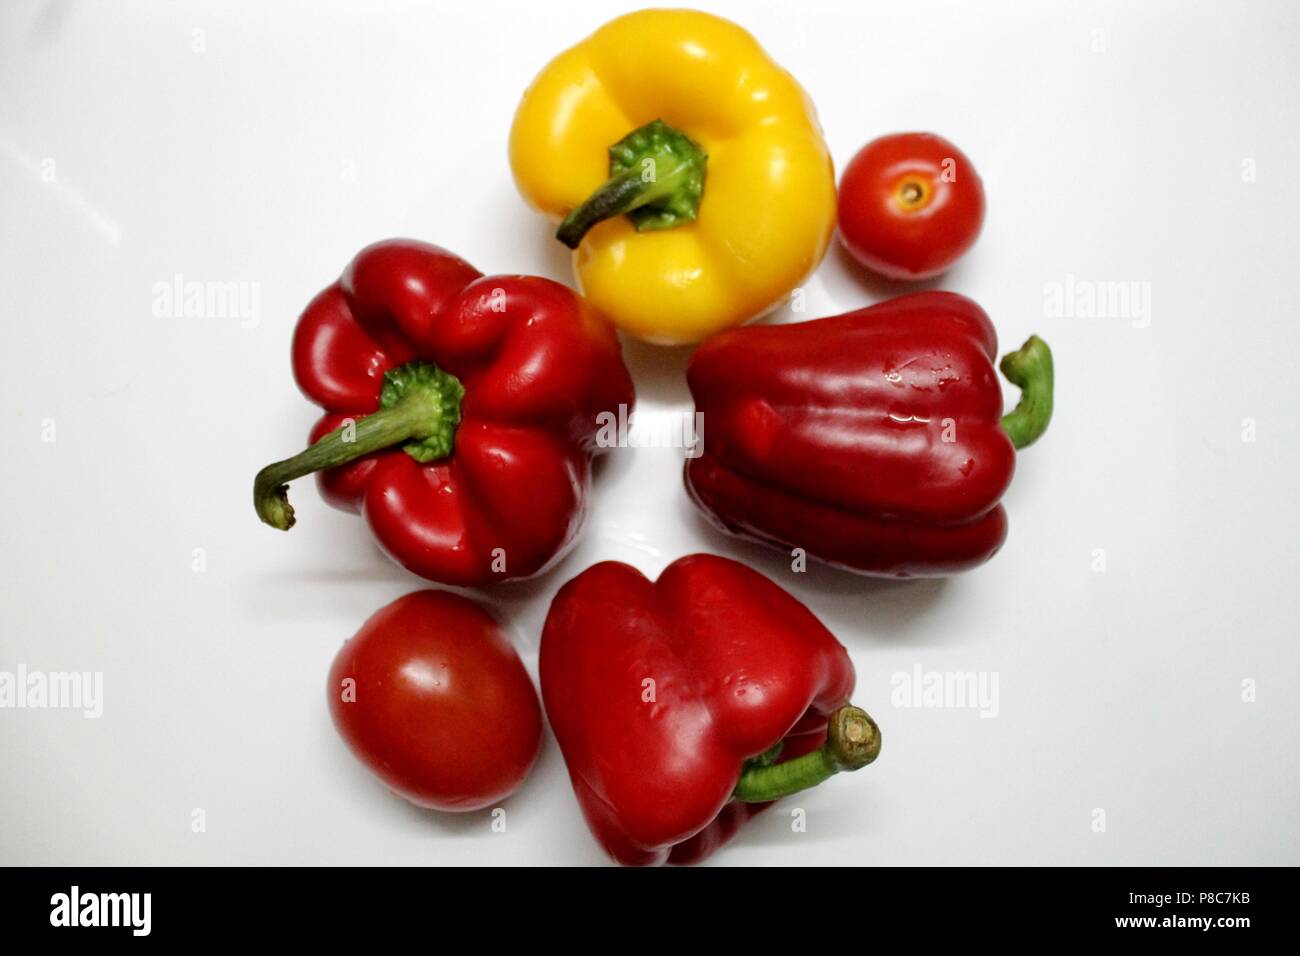 appetizing ripe juicy colorful vegetables prepare for make dinner Stock Photo